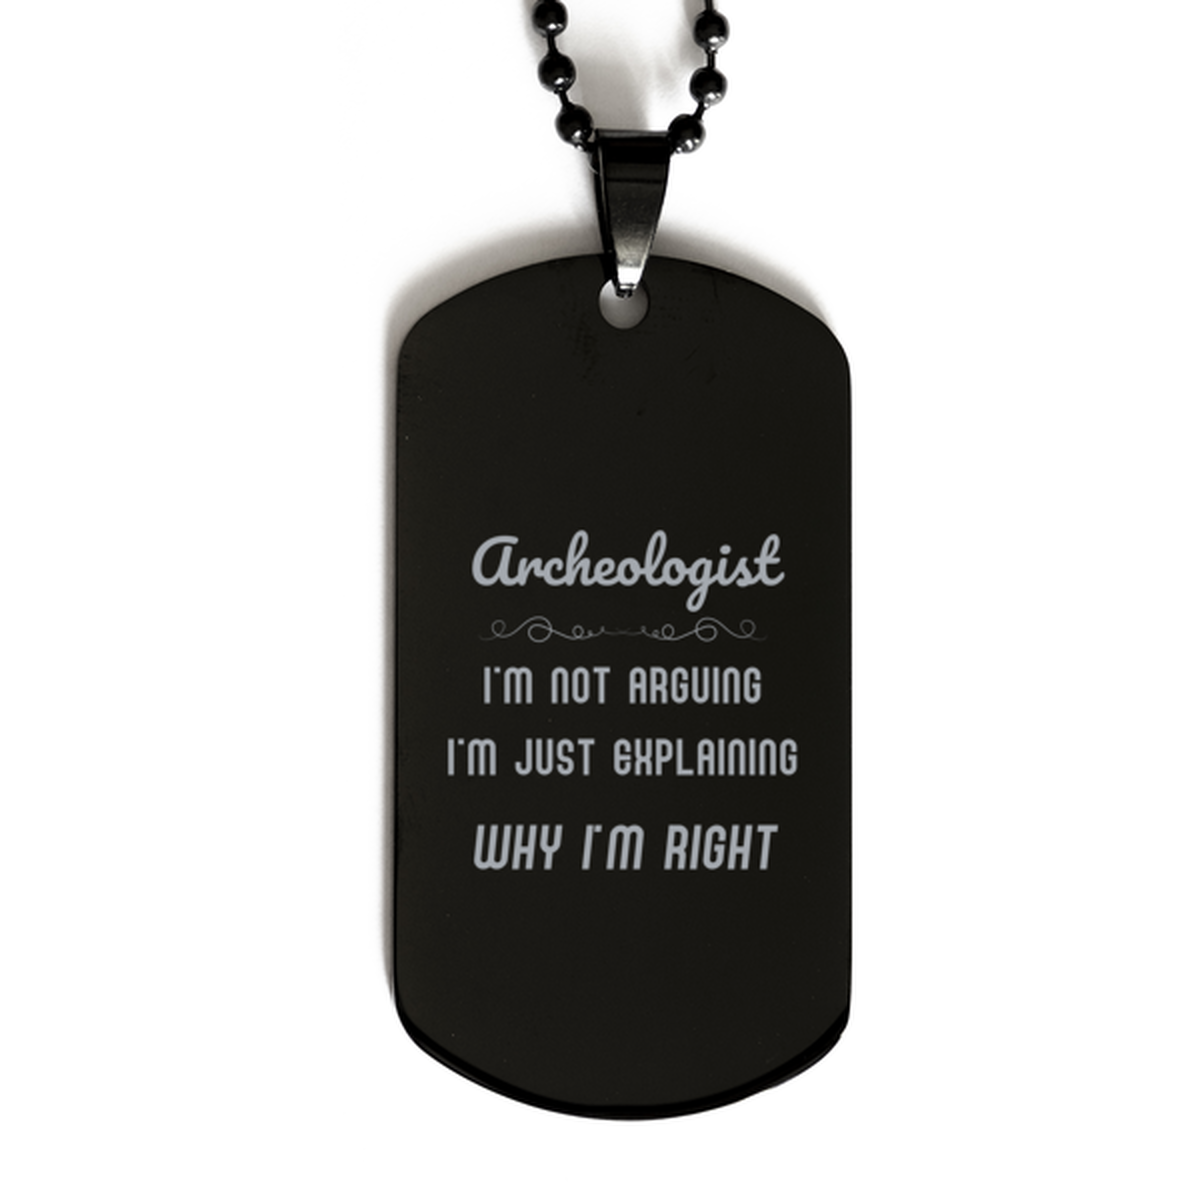 Archeologist I'm not Arguing. I'm Just Explaining Why I'm RIGHT Black Dog Tag, Funny Saying Quote Archeologist Gifts For Archeologist Graduation Birthday Christmas Gifts for Men Women Coworker